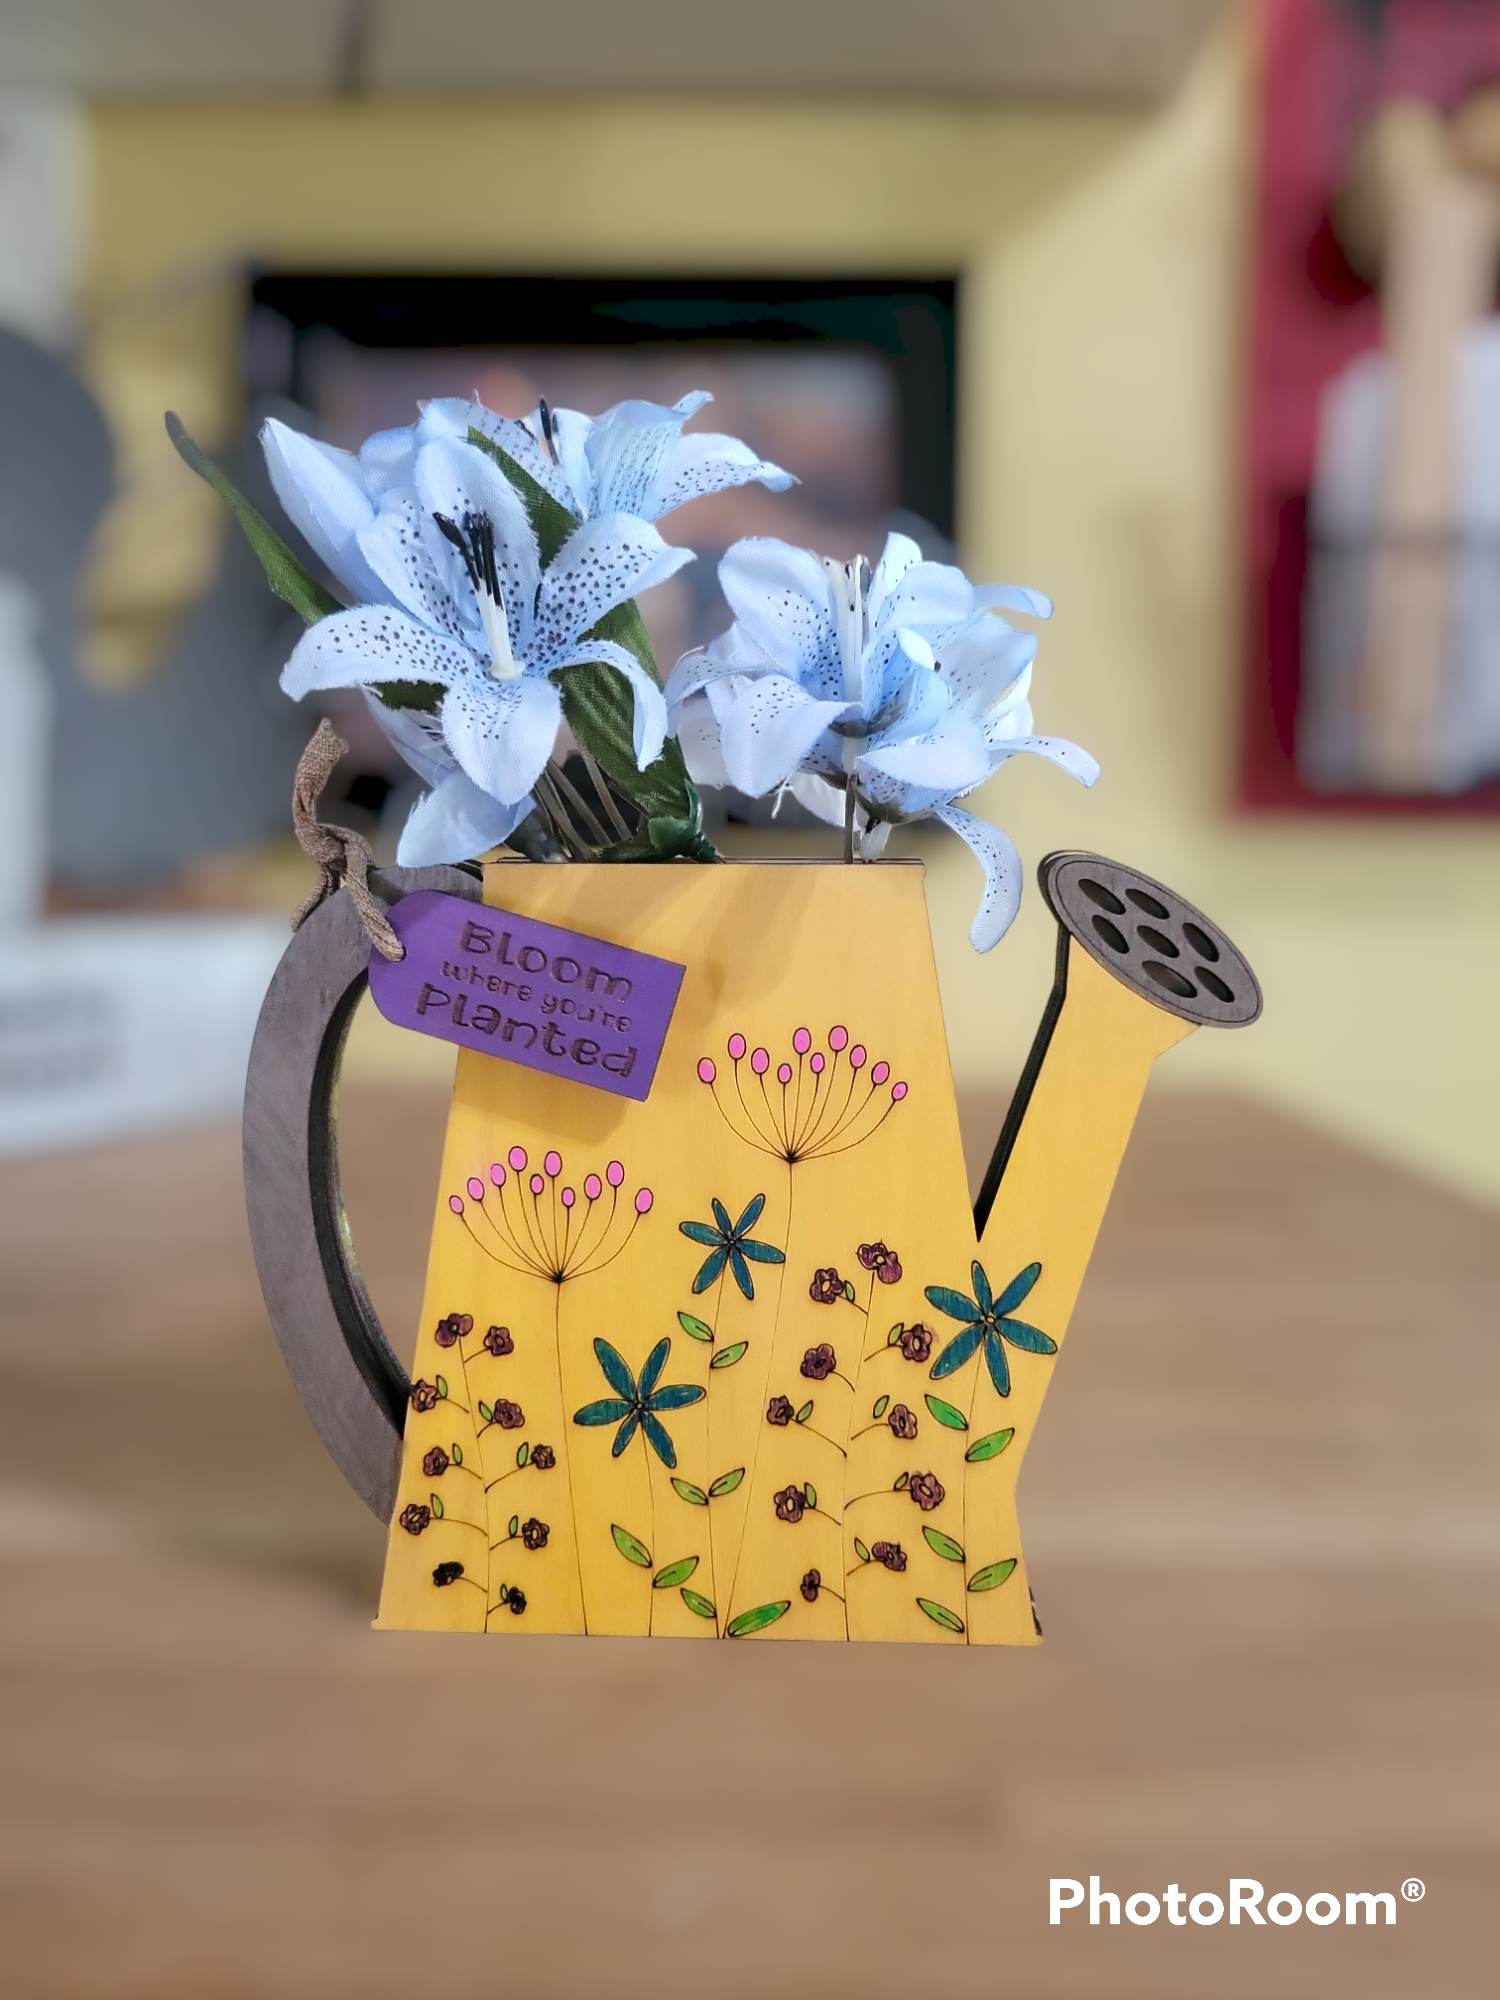 Completed painted wildflower watering can DIY kit with fake flowers